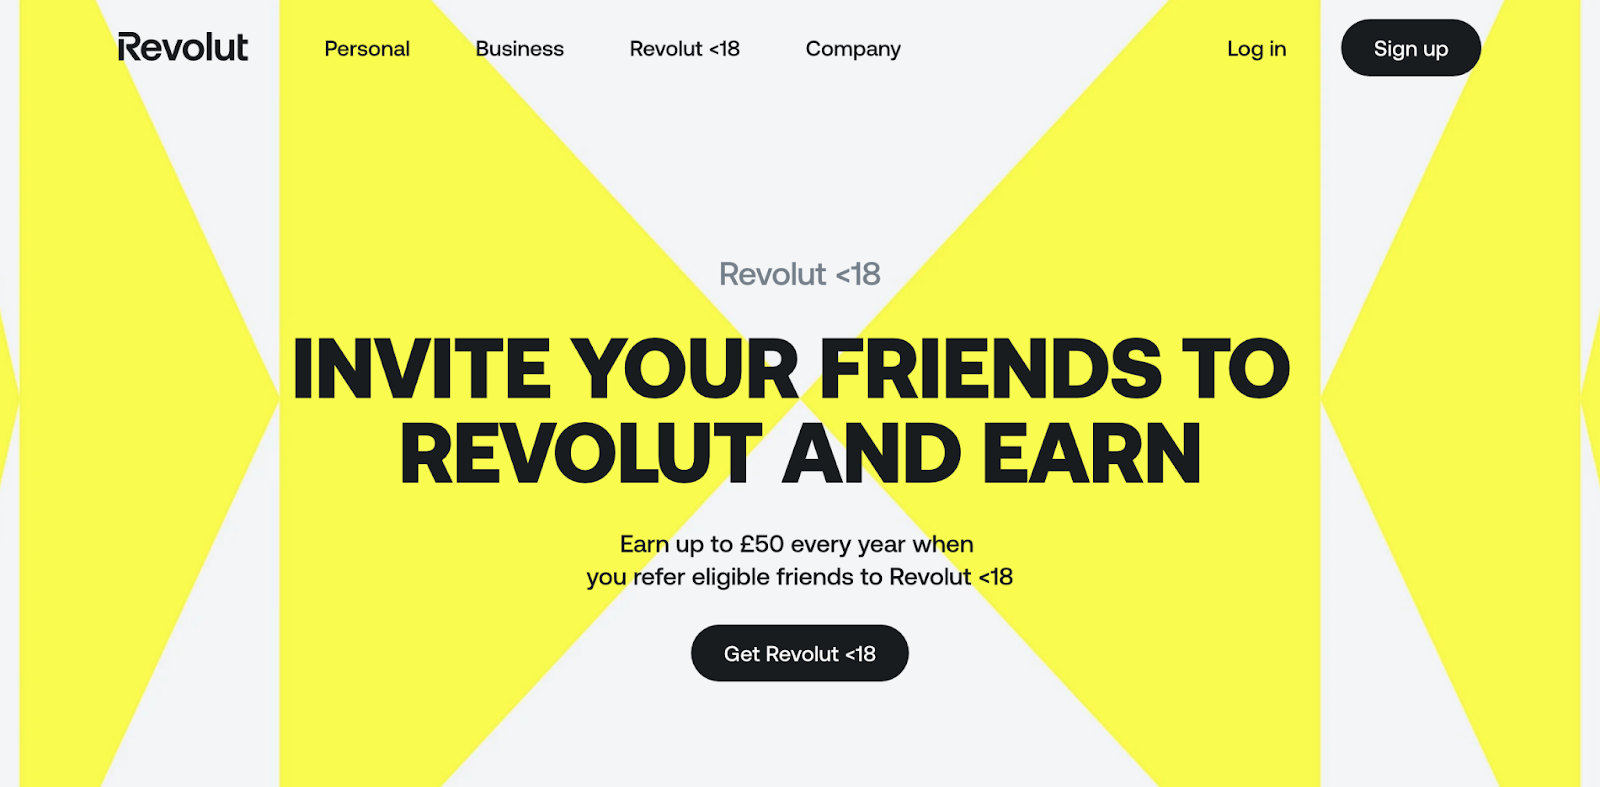 Invite your friends to Revolut and earn